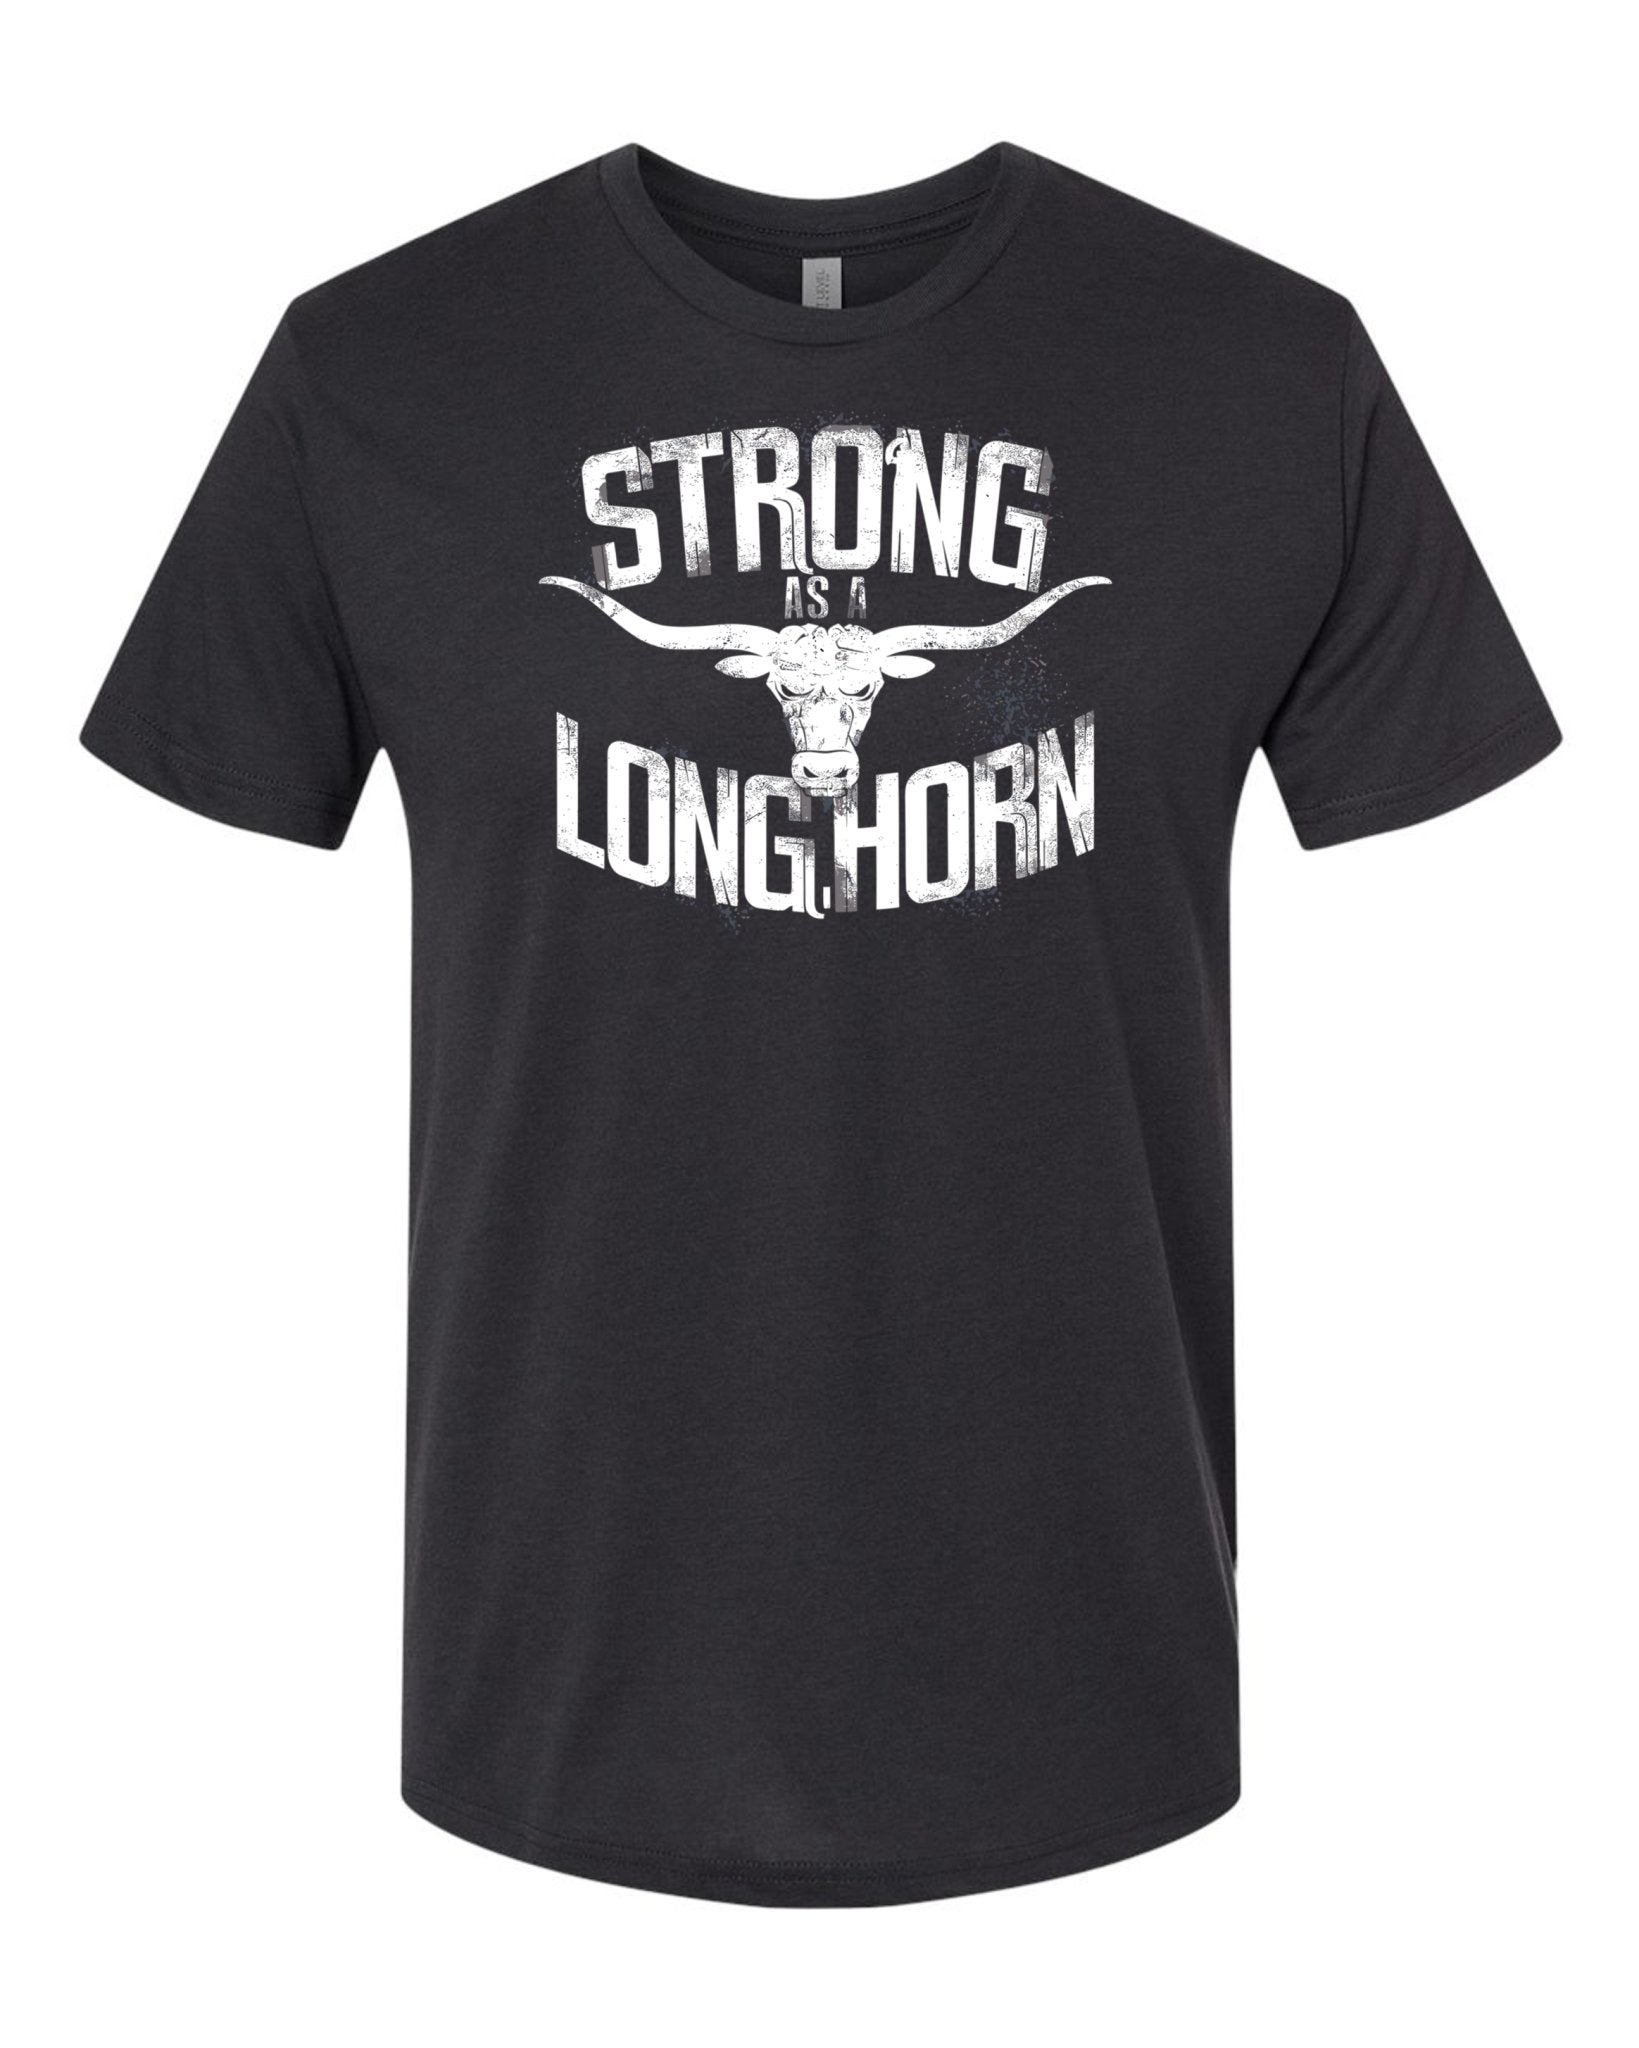 Strong as a Longhorn T-Shirt: Texas Pride Apparel for Resilient Souls -